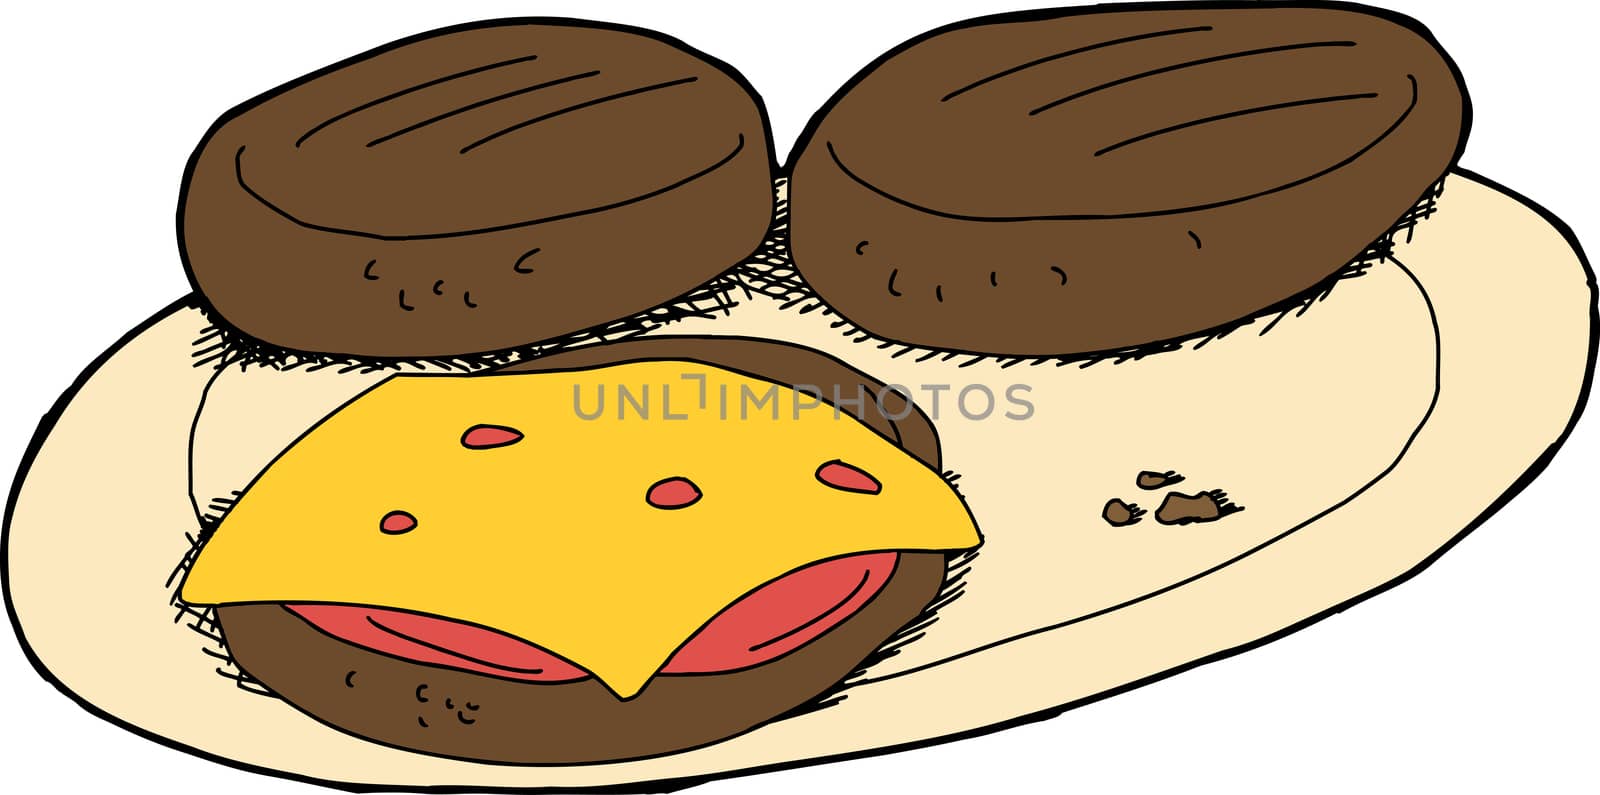 Isolated burgers on plate over white background